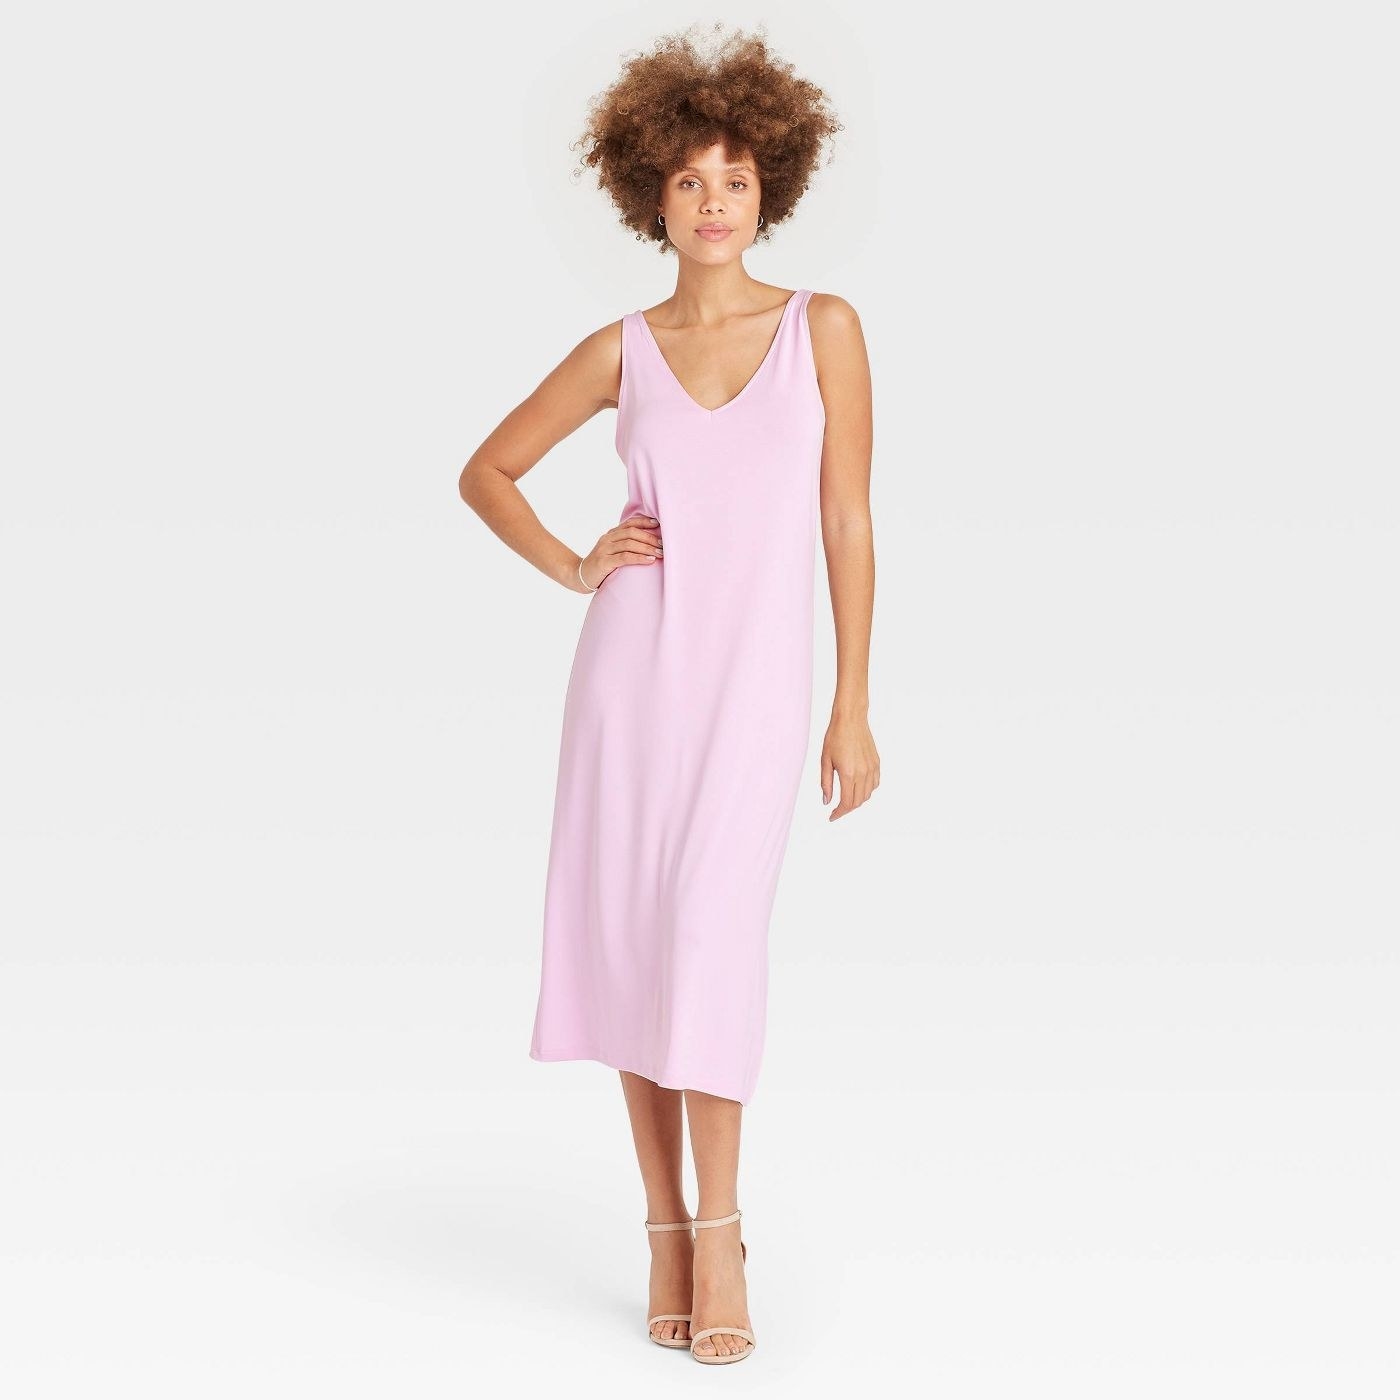 31 Stylish Summer Dresses From Target